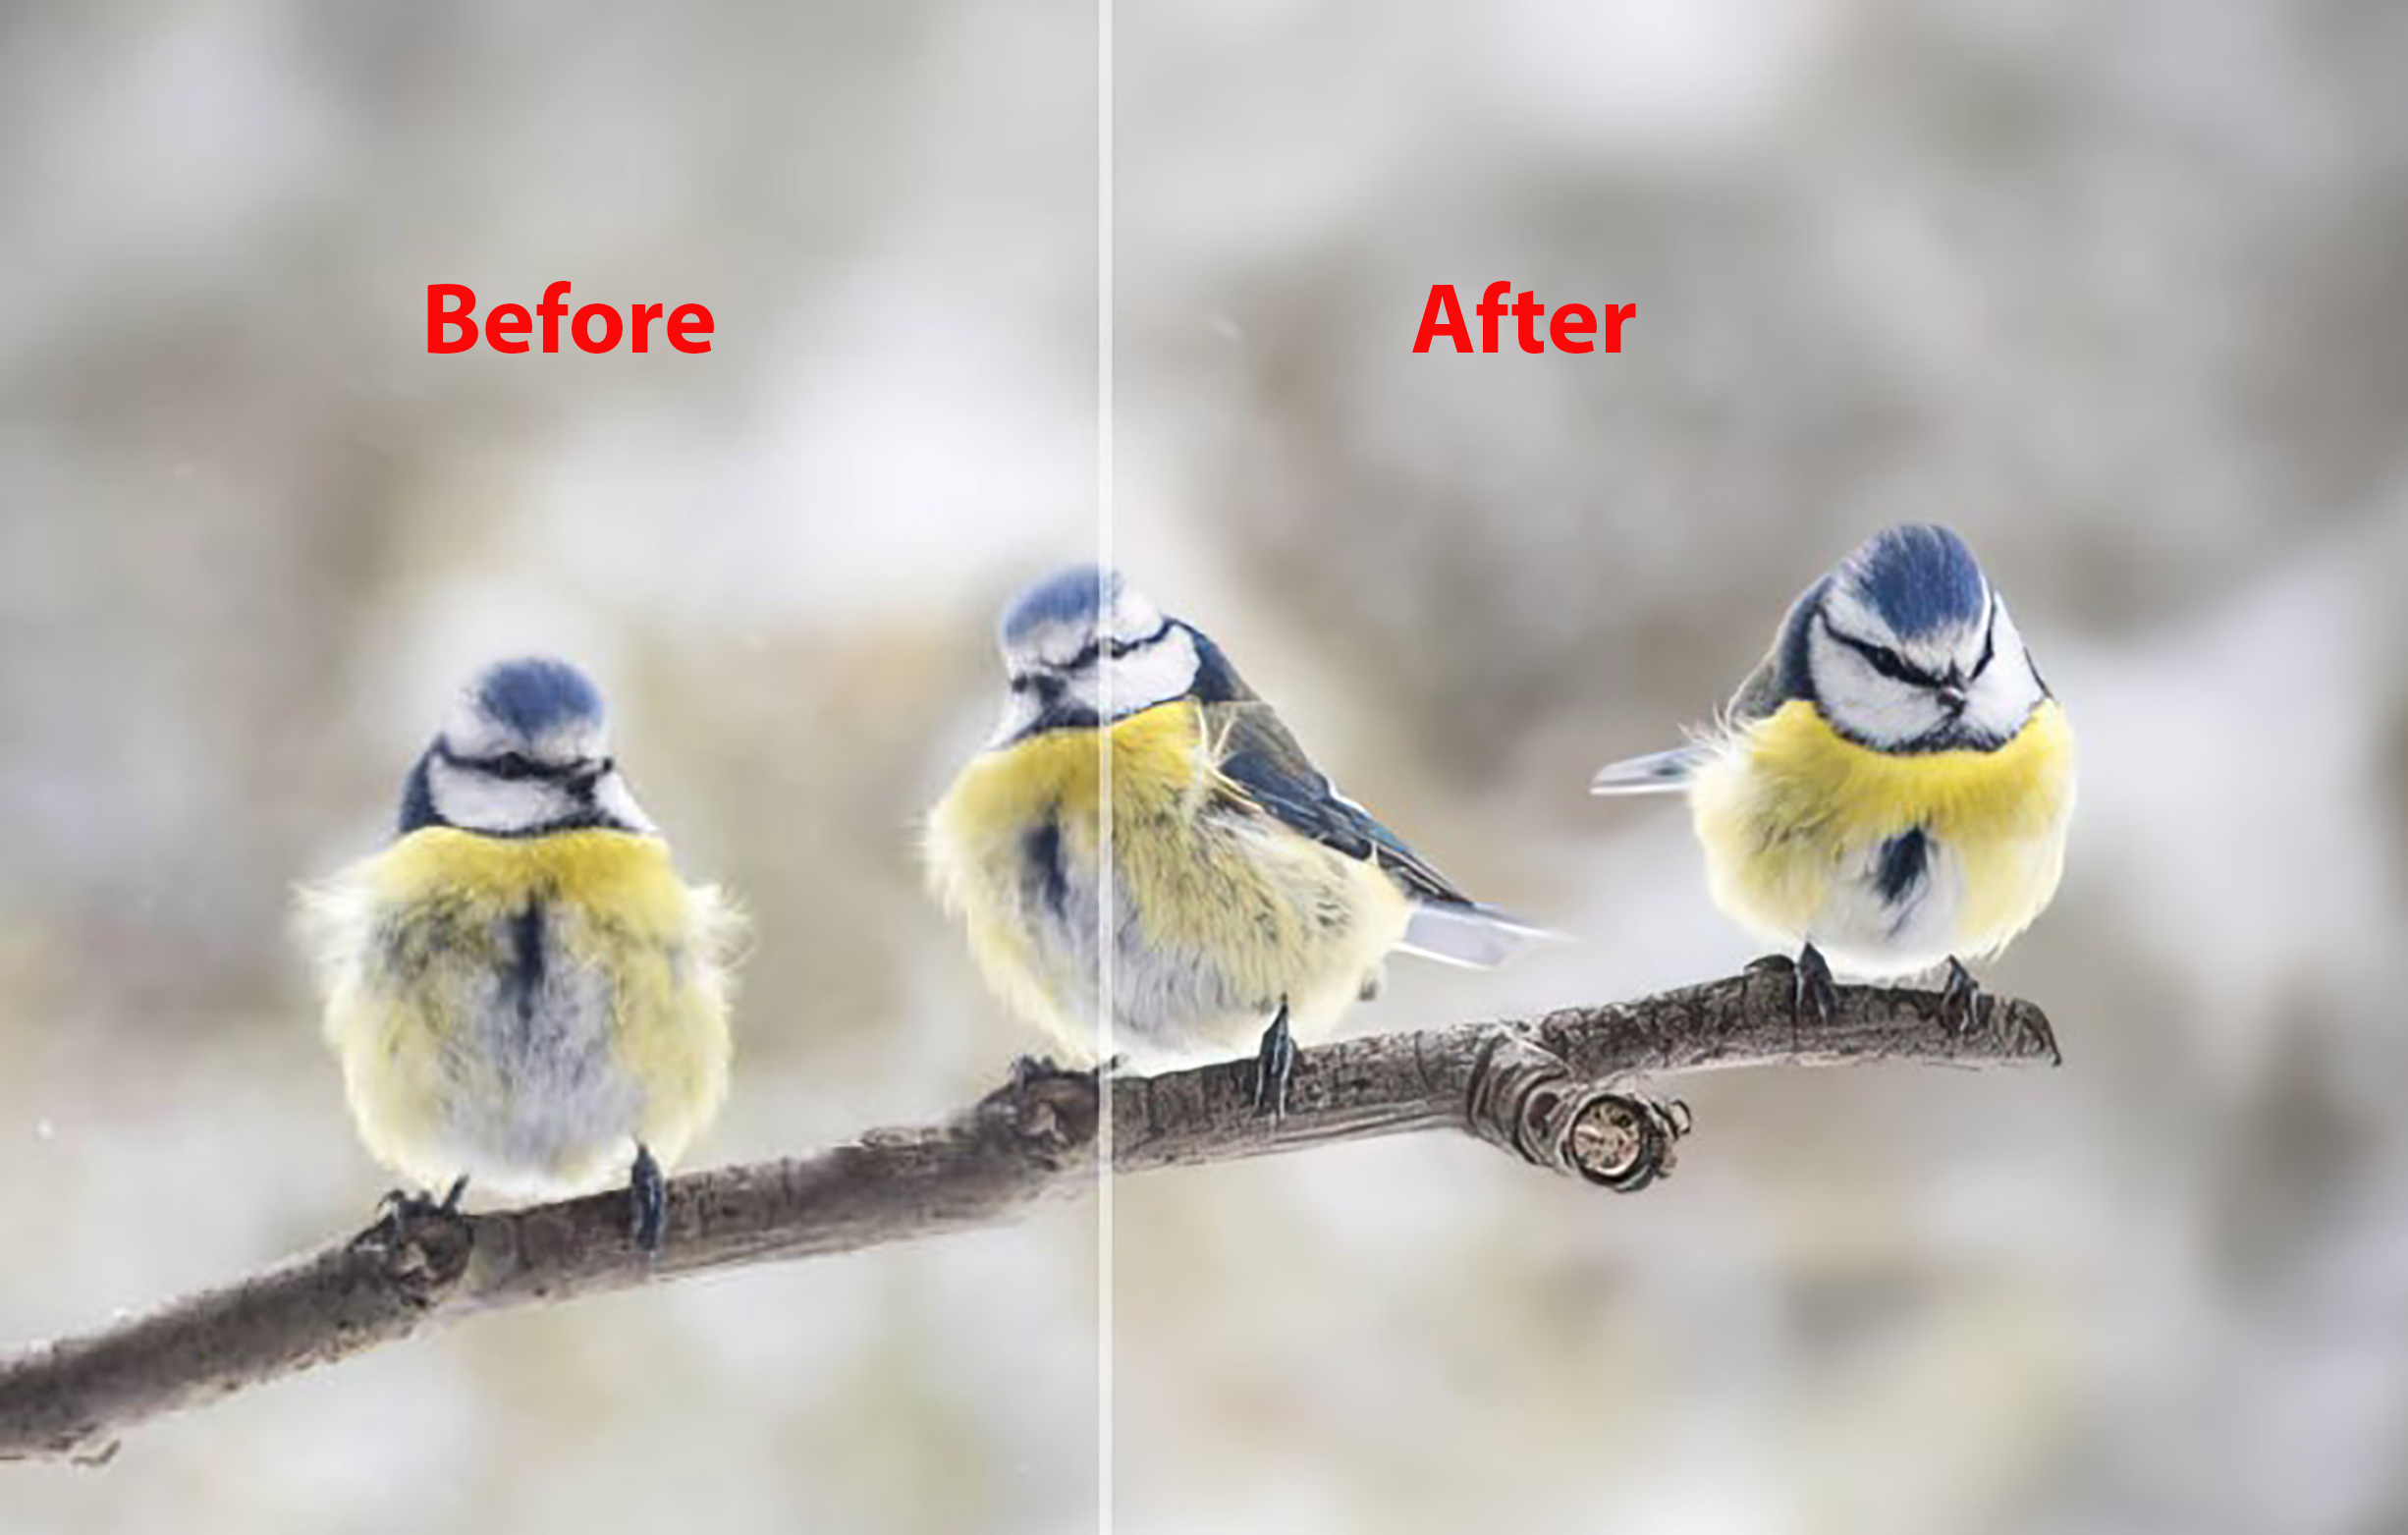 49329I will transparent, background removal, and watermark remover in just 40 minutes